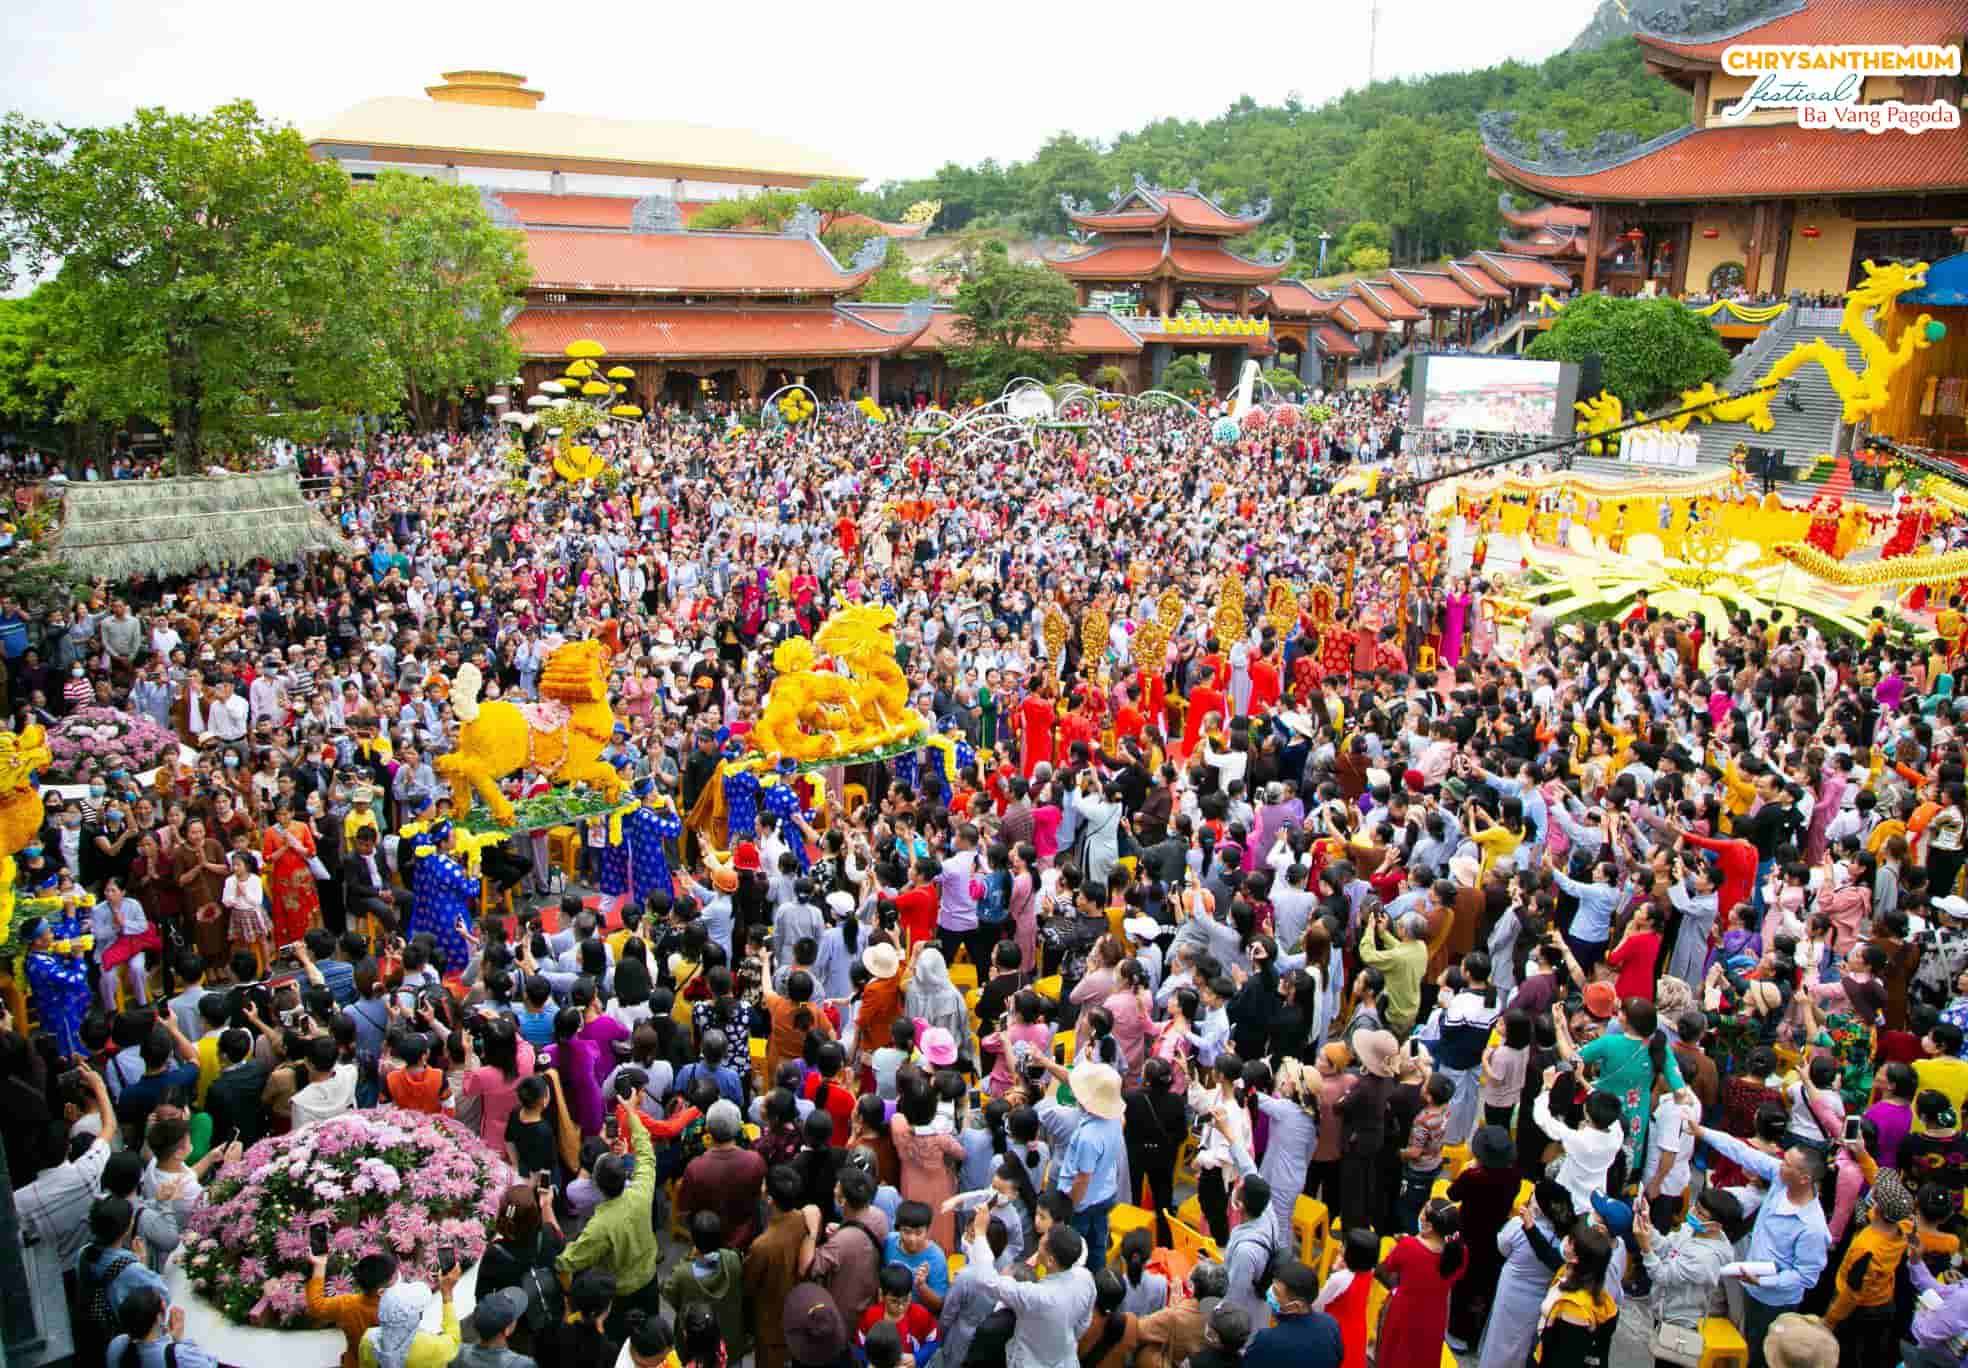 Thousands of Buddhists and tourists attending the Opening ceremony of Chrysanthemum Festival 2020 at Ba Vang Pagoda